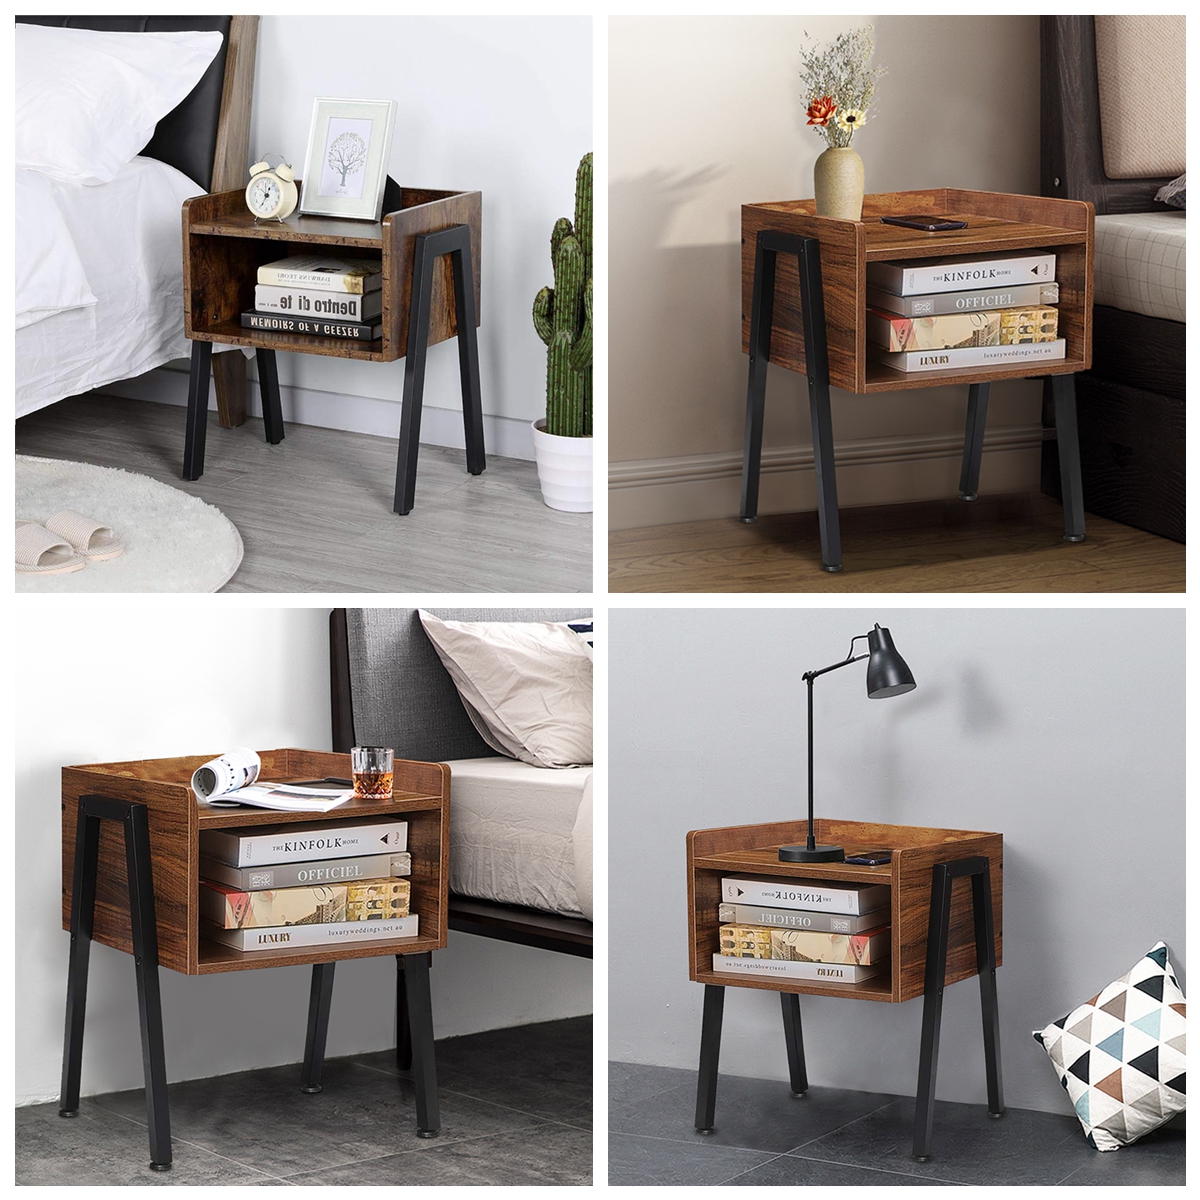 VASAGLE--Wooden-Table-Cabinet-Side-Table--16quotW-19quotH-Metal-Frame-Cabinet-Side-Table-Modern-Craf-1626696-6